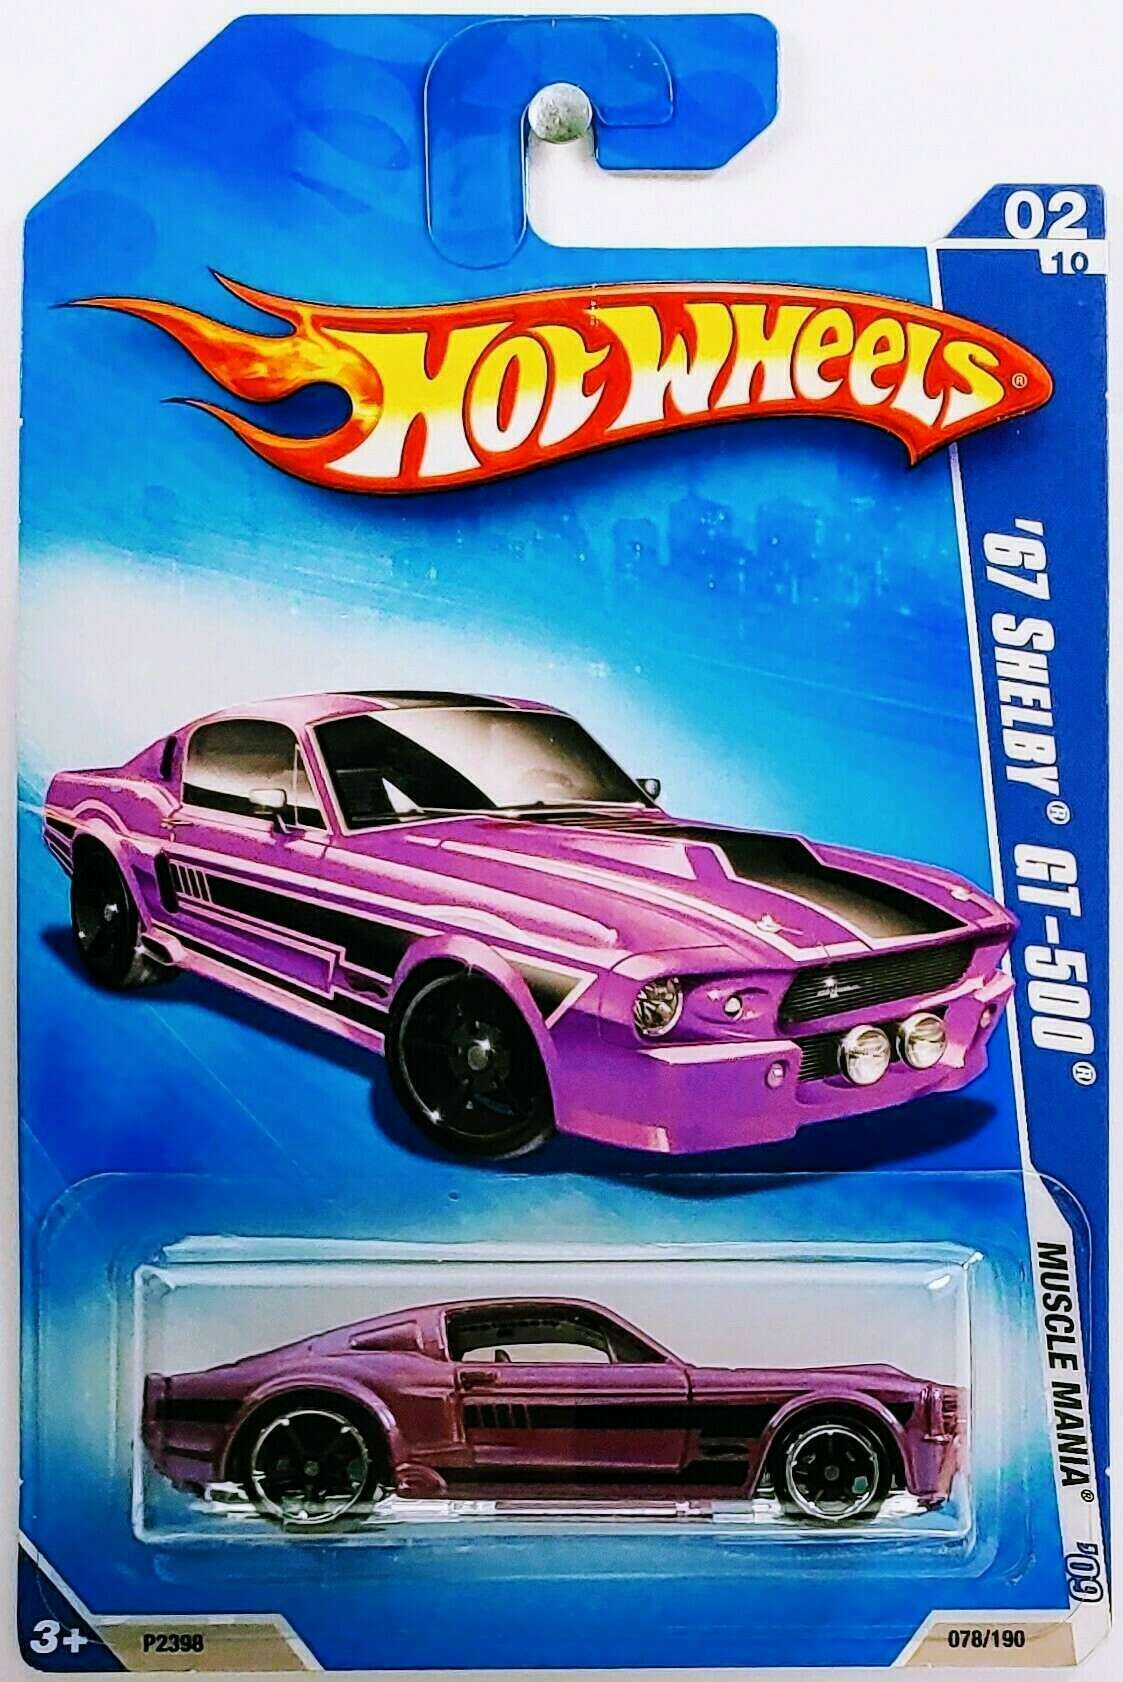 Hot Wheels 2009 - Collector # 078/190 - Muscle Mania 02/10 - '67 Shelby GT-500 - Purple - Kmart Exclusive